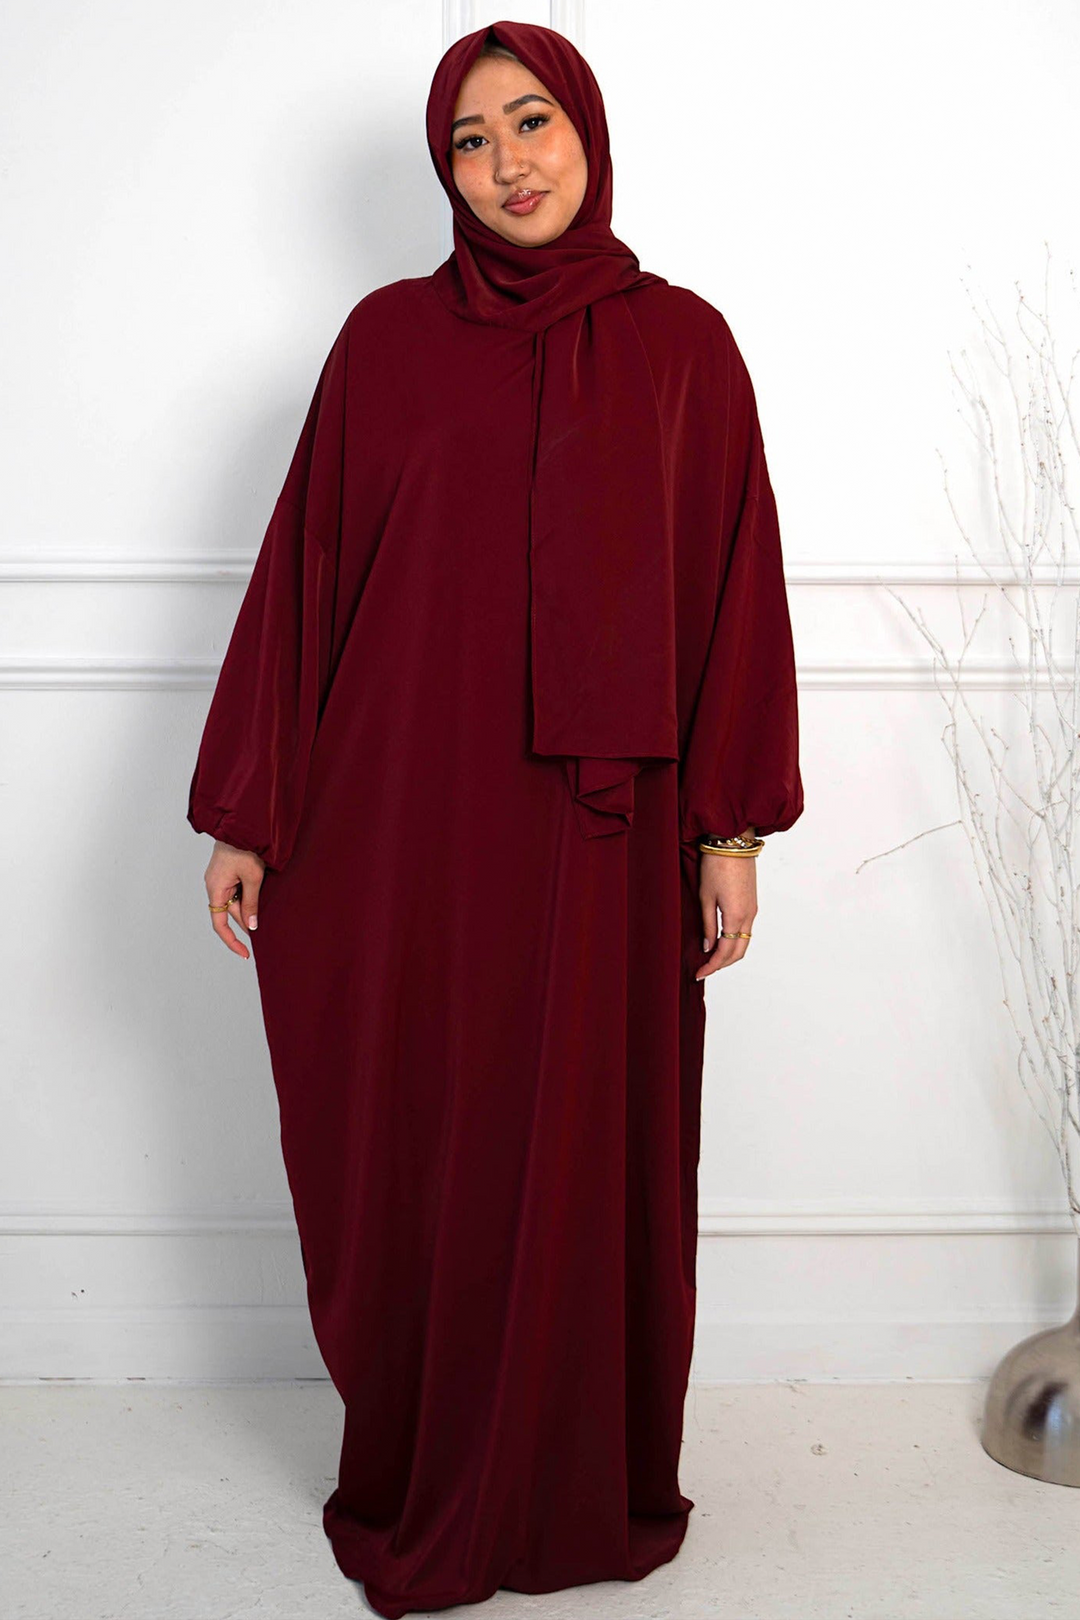 Wrap One Piece Salah Prayer Outfit (More colors available)